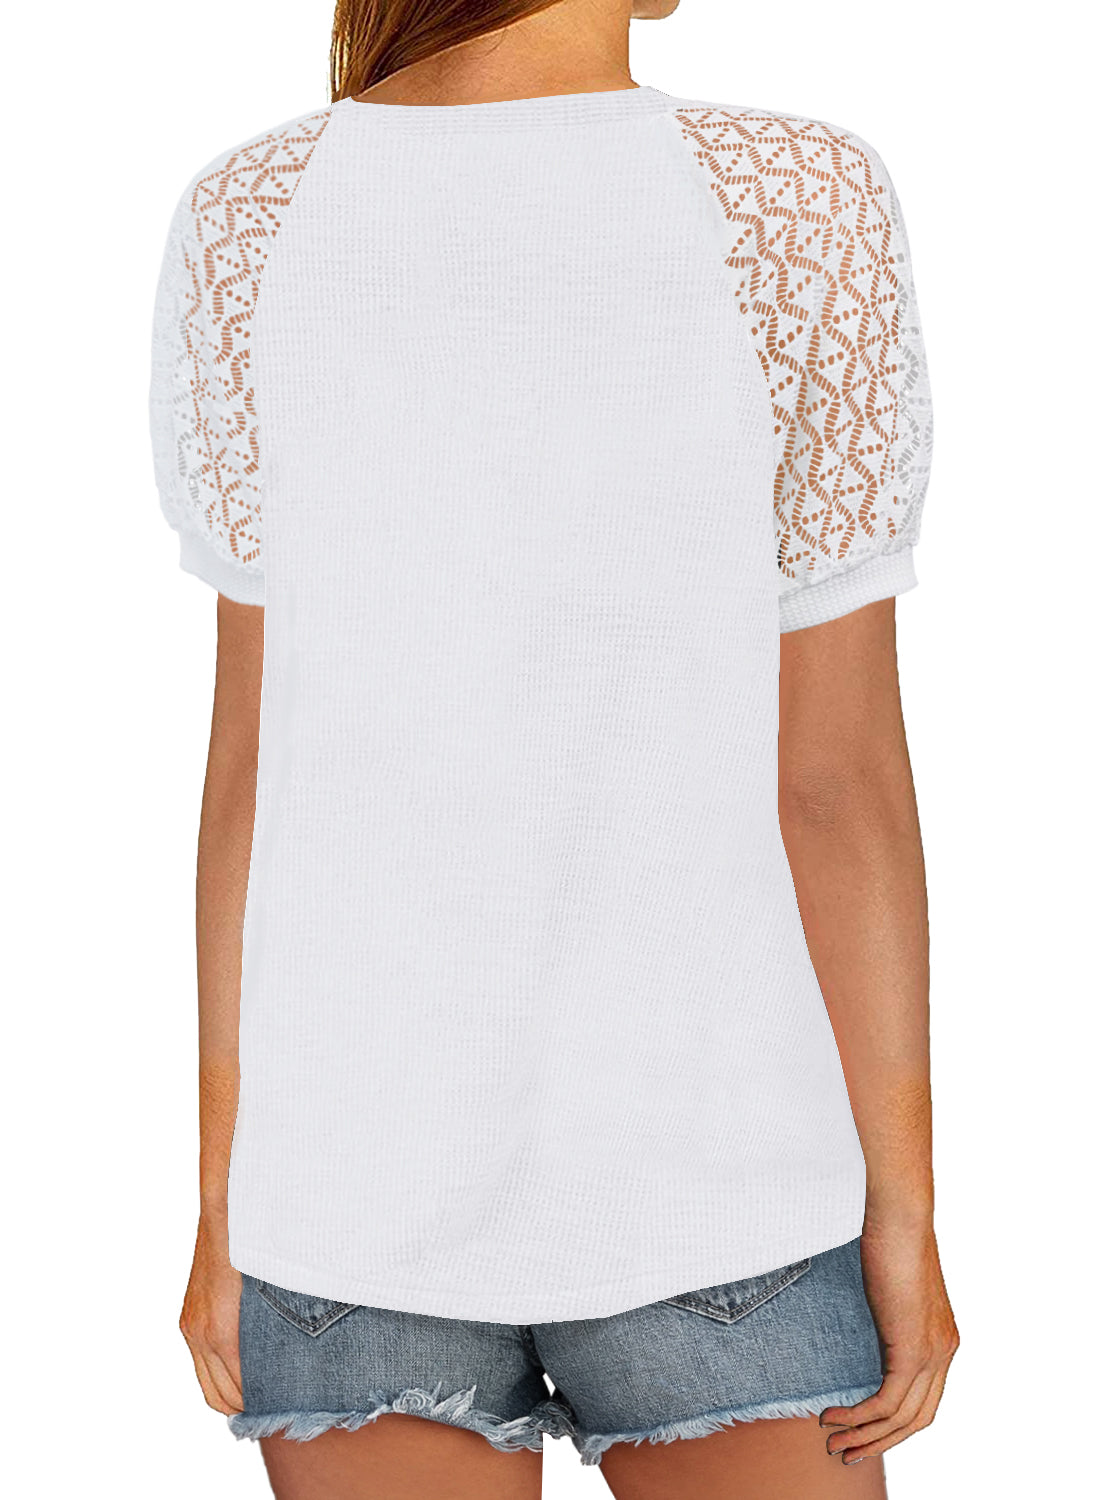 MIHOLL Women's Lace Short Sleeve V Neck Shirts Loose Casual Tops Tee Shirt